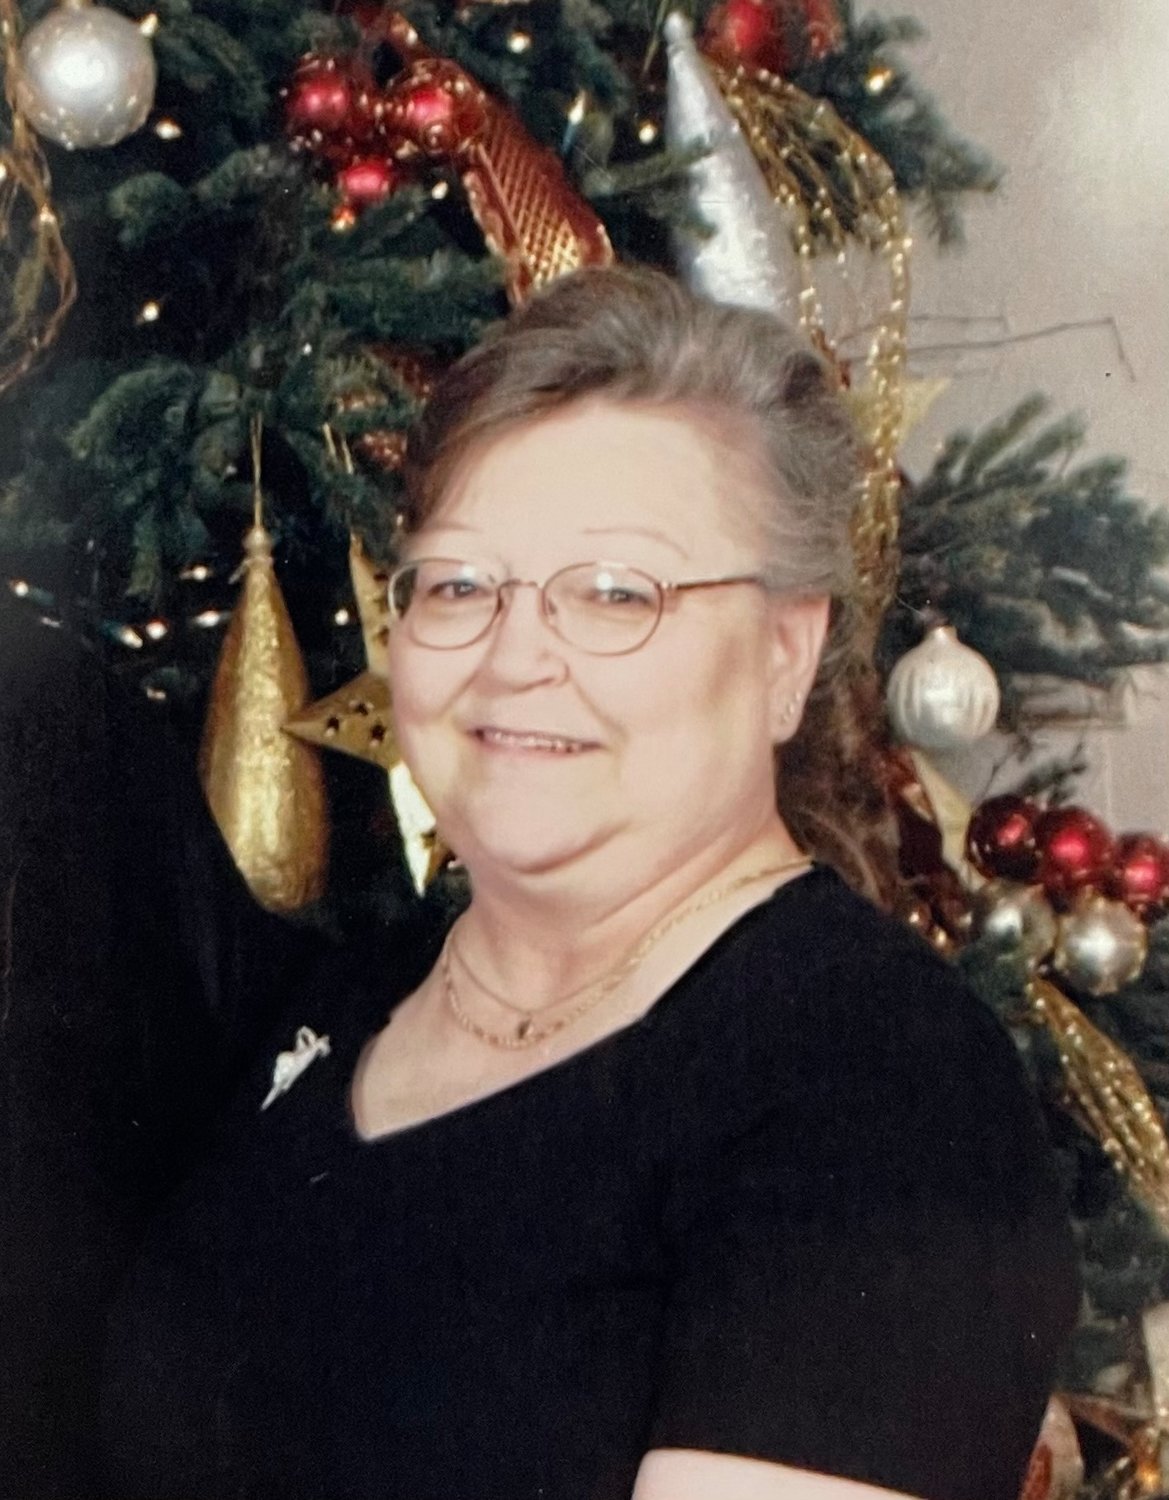 Paula Goodman Roesler passed away October 31 at the age of 74. She leaves behind a family she cared for deeply. She was a dog lover and her family will miss her hugs greatly.